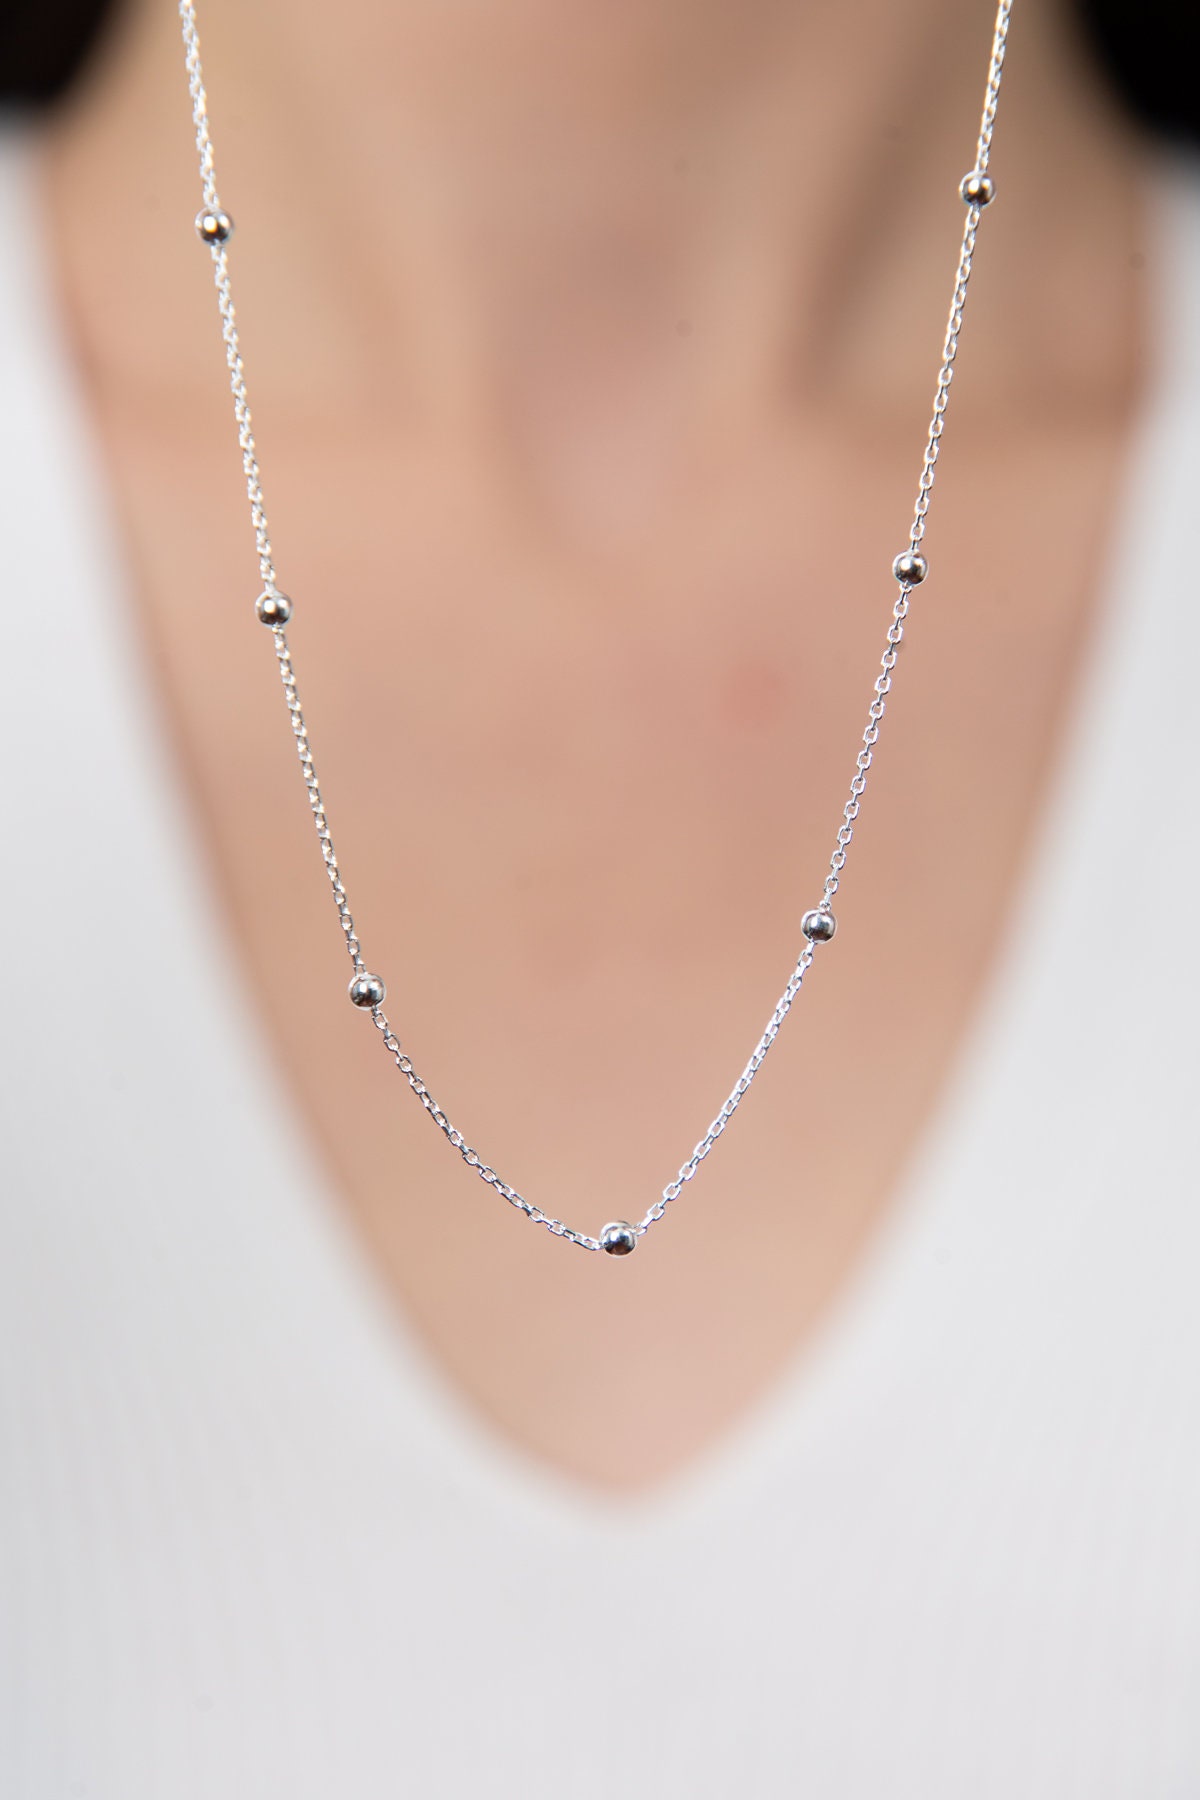 Sieraden Kettingen Kettingen 14k Gold Beaded Satellite Chain,Gold Filled,Sterling Silver or Rose,Dew Drops,Simple,Everday Layering Necklace,QW31 